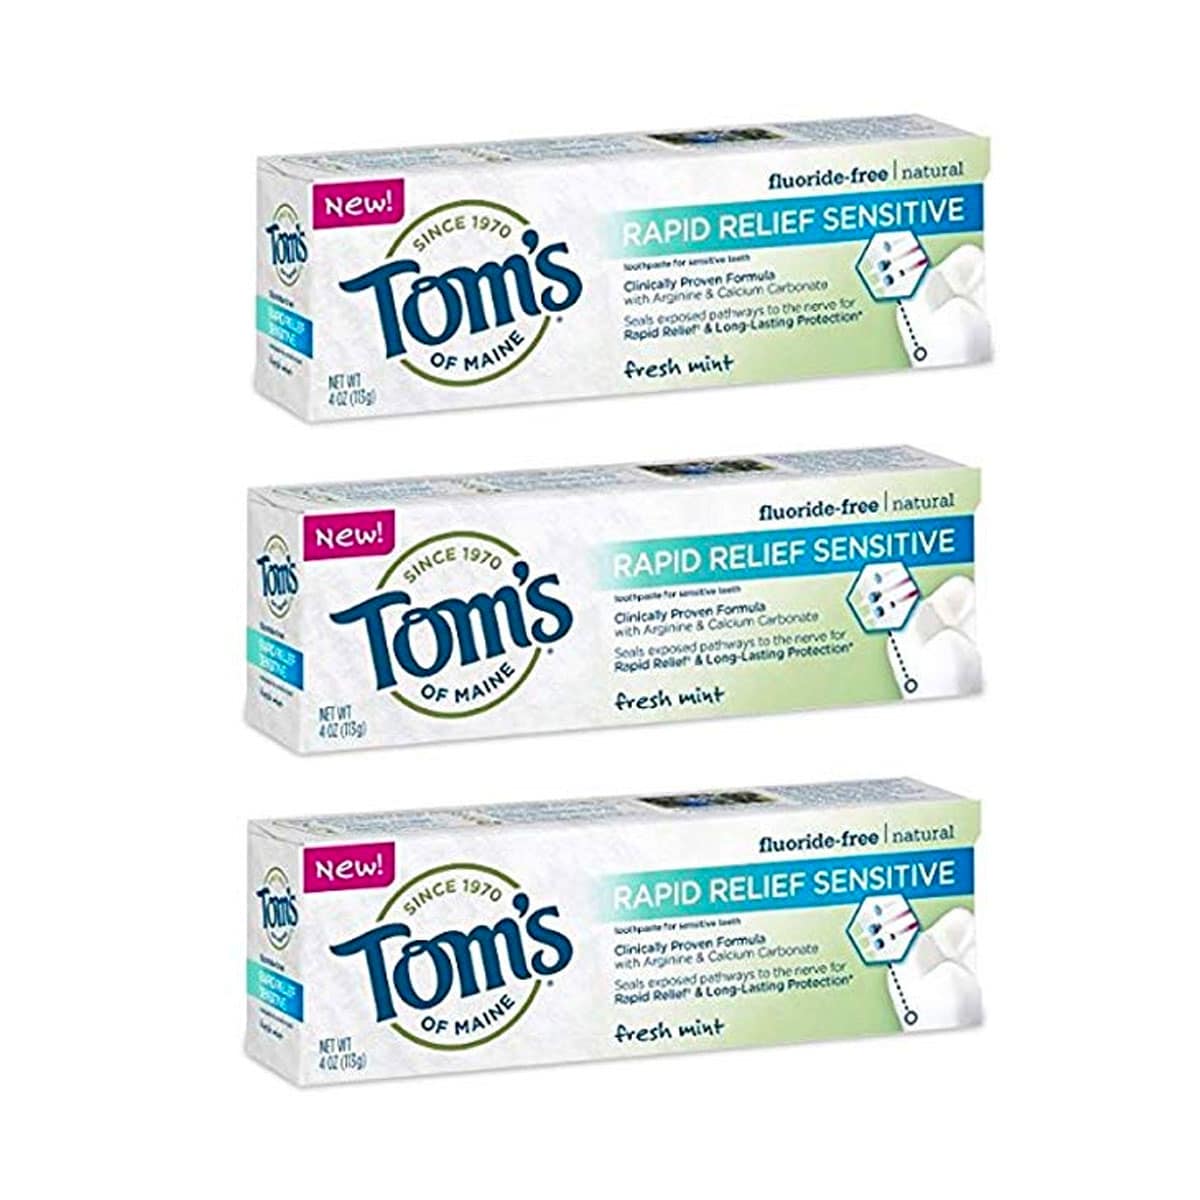 Tom’s Of Maine Rapid Relief Sensitive Natural Toothpaste (3 Pack)